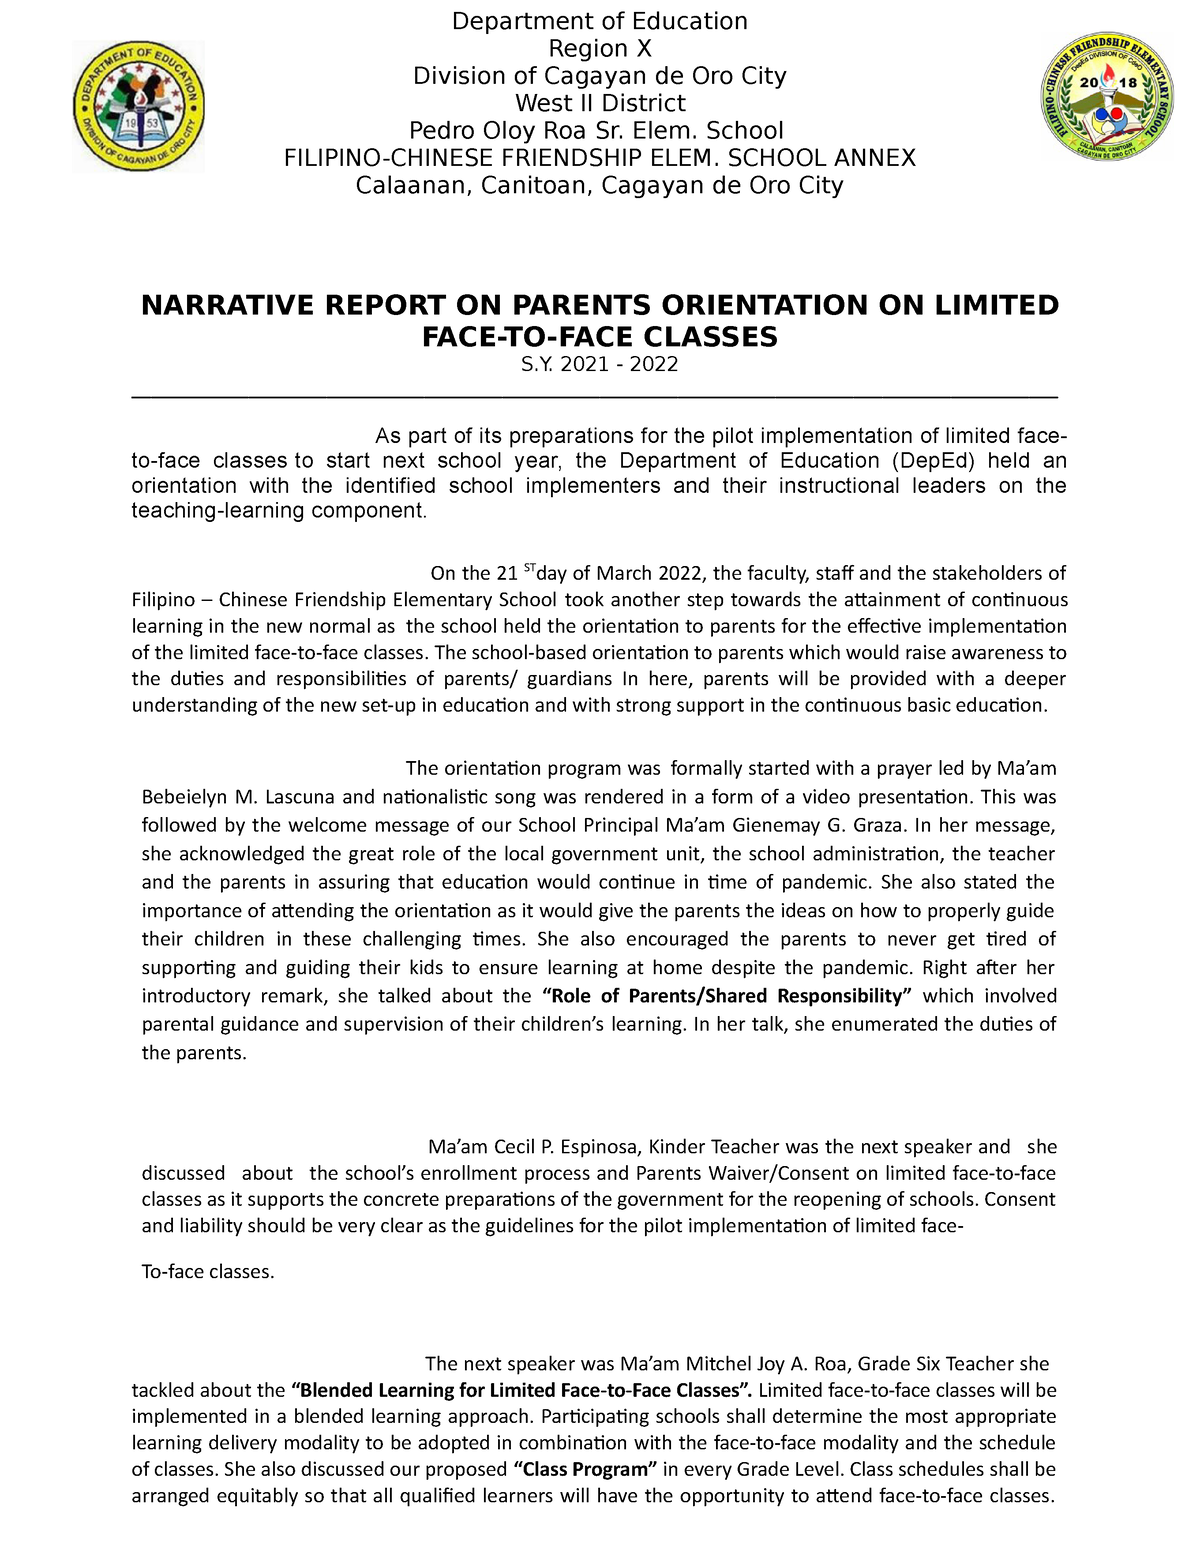 Narrative report on limited facetoface NARRATIVE REPORT ON PARENTS